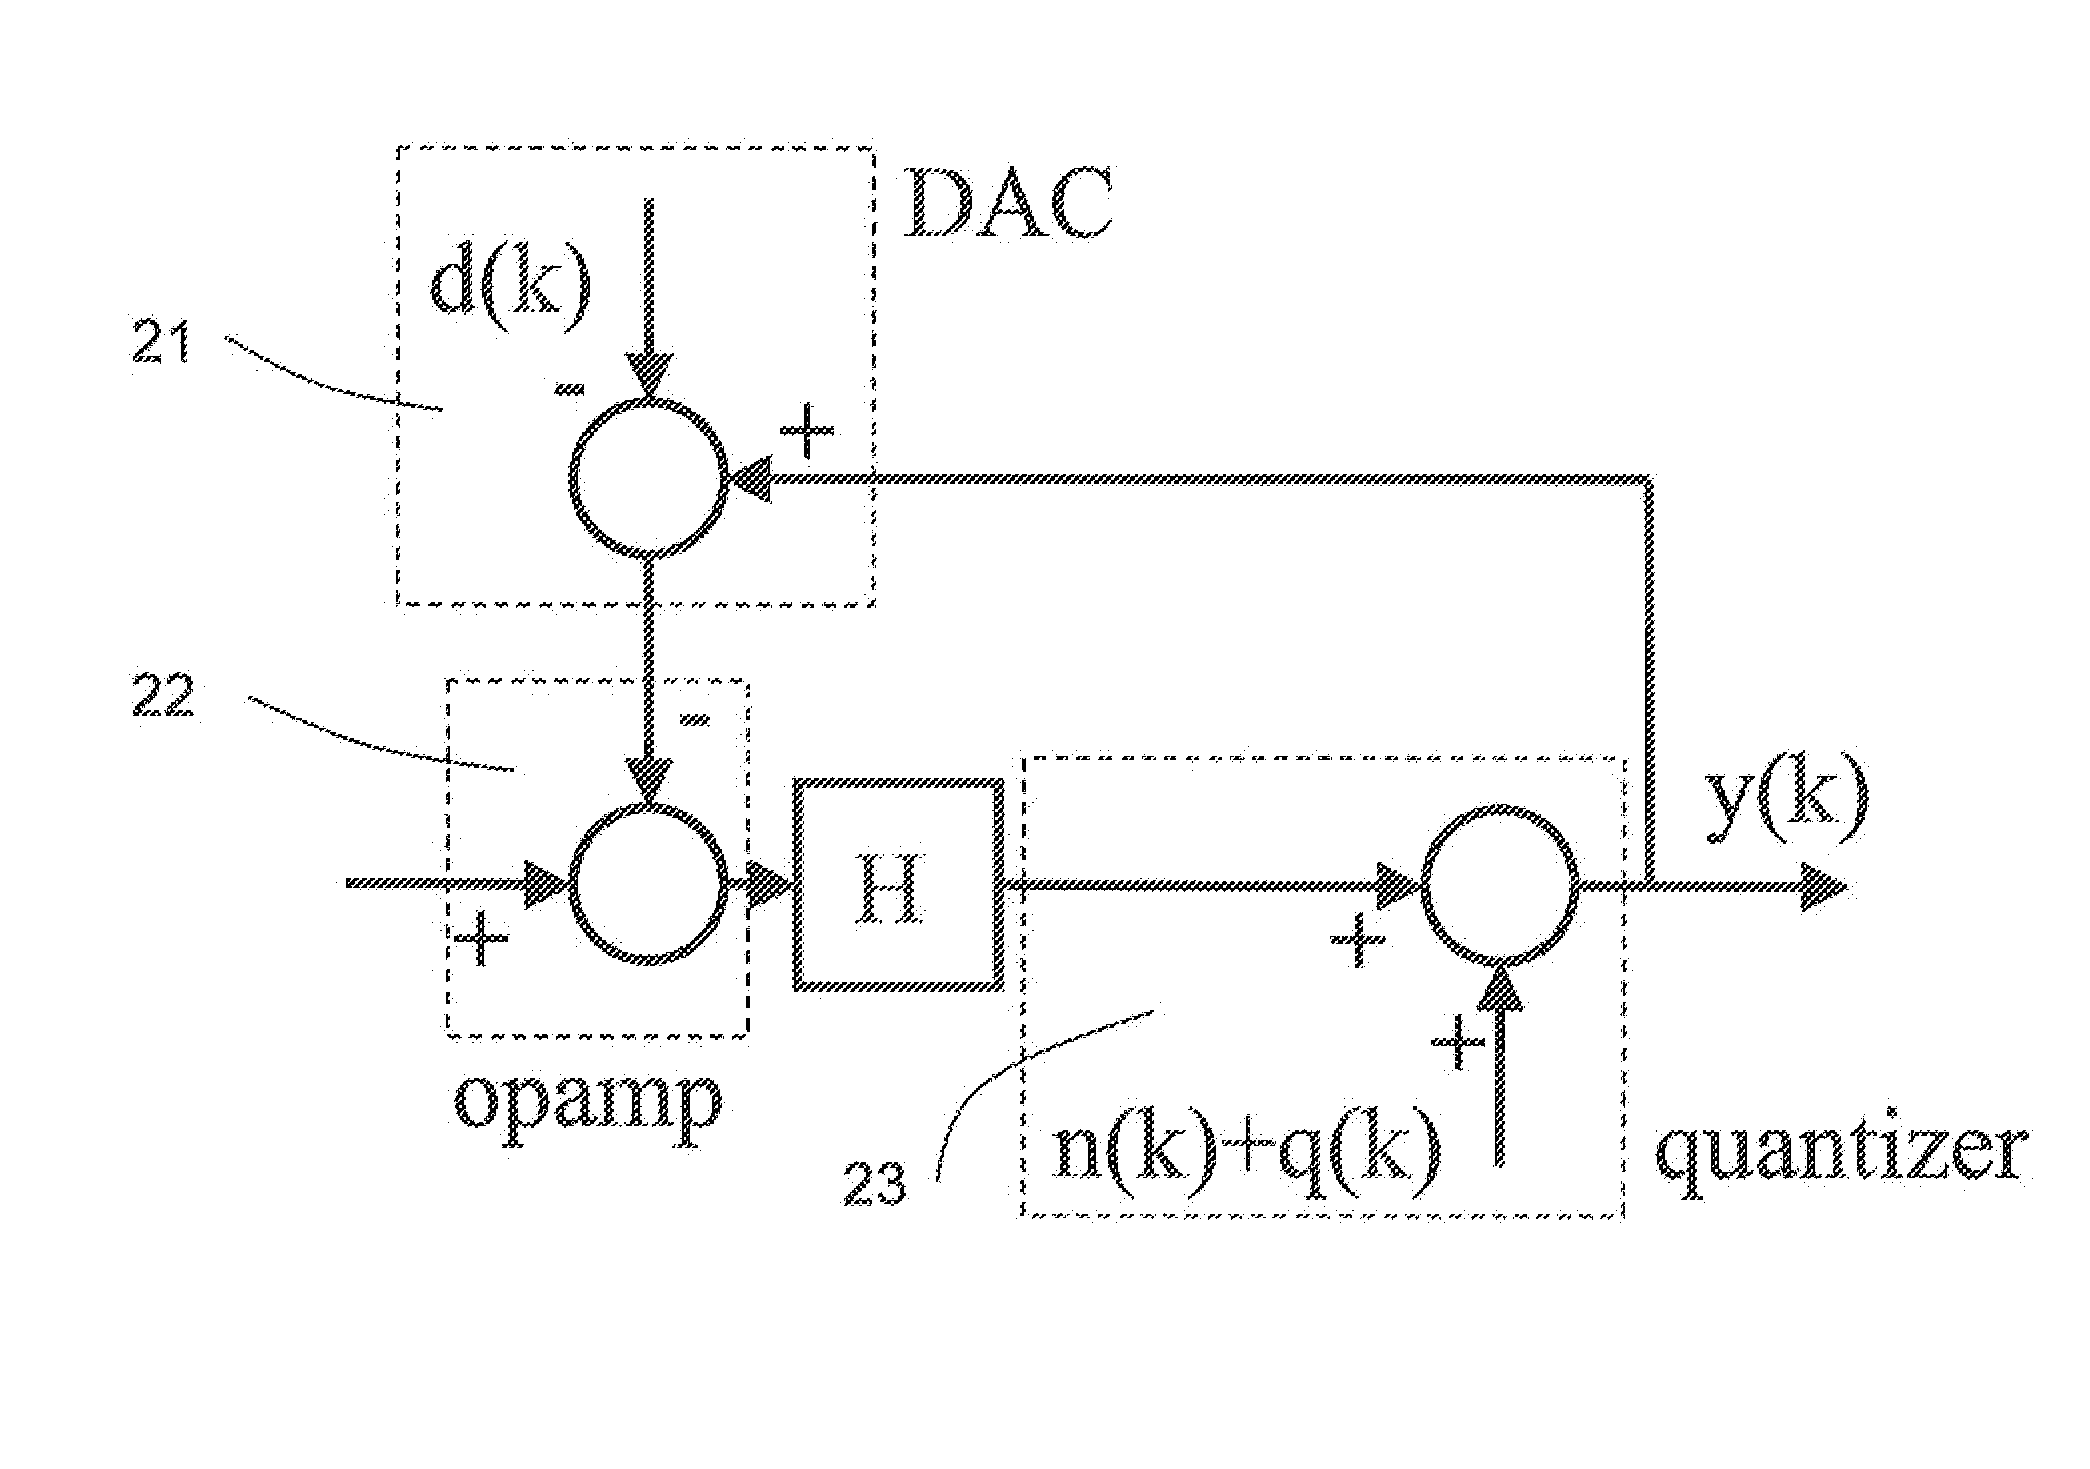 Method to linearize the output from an ADC